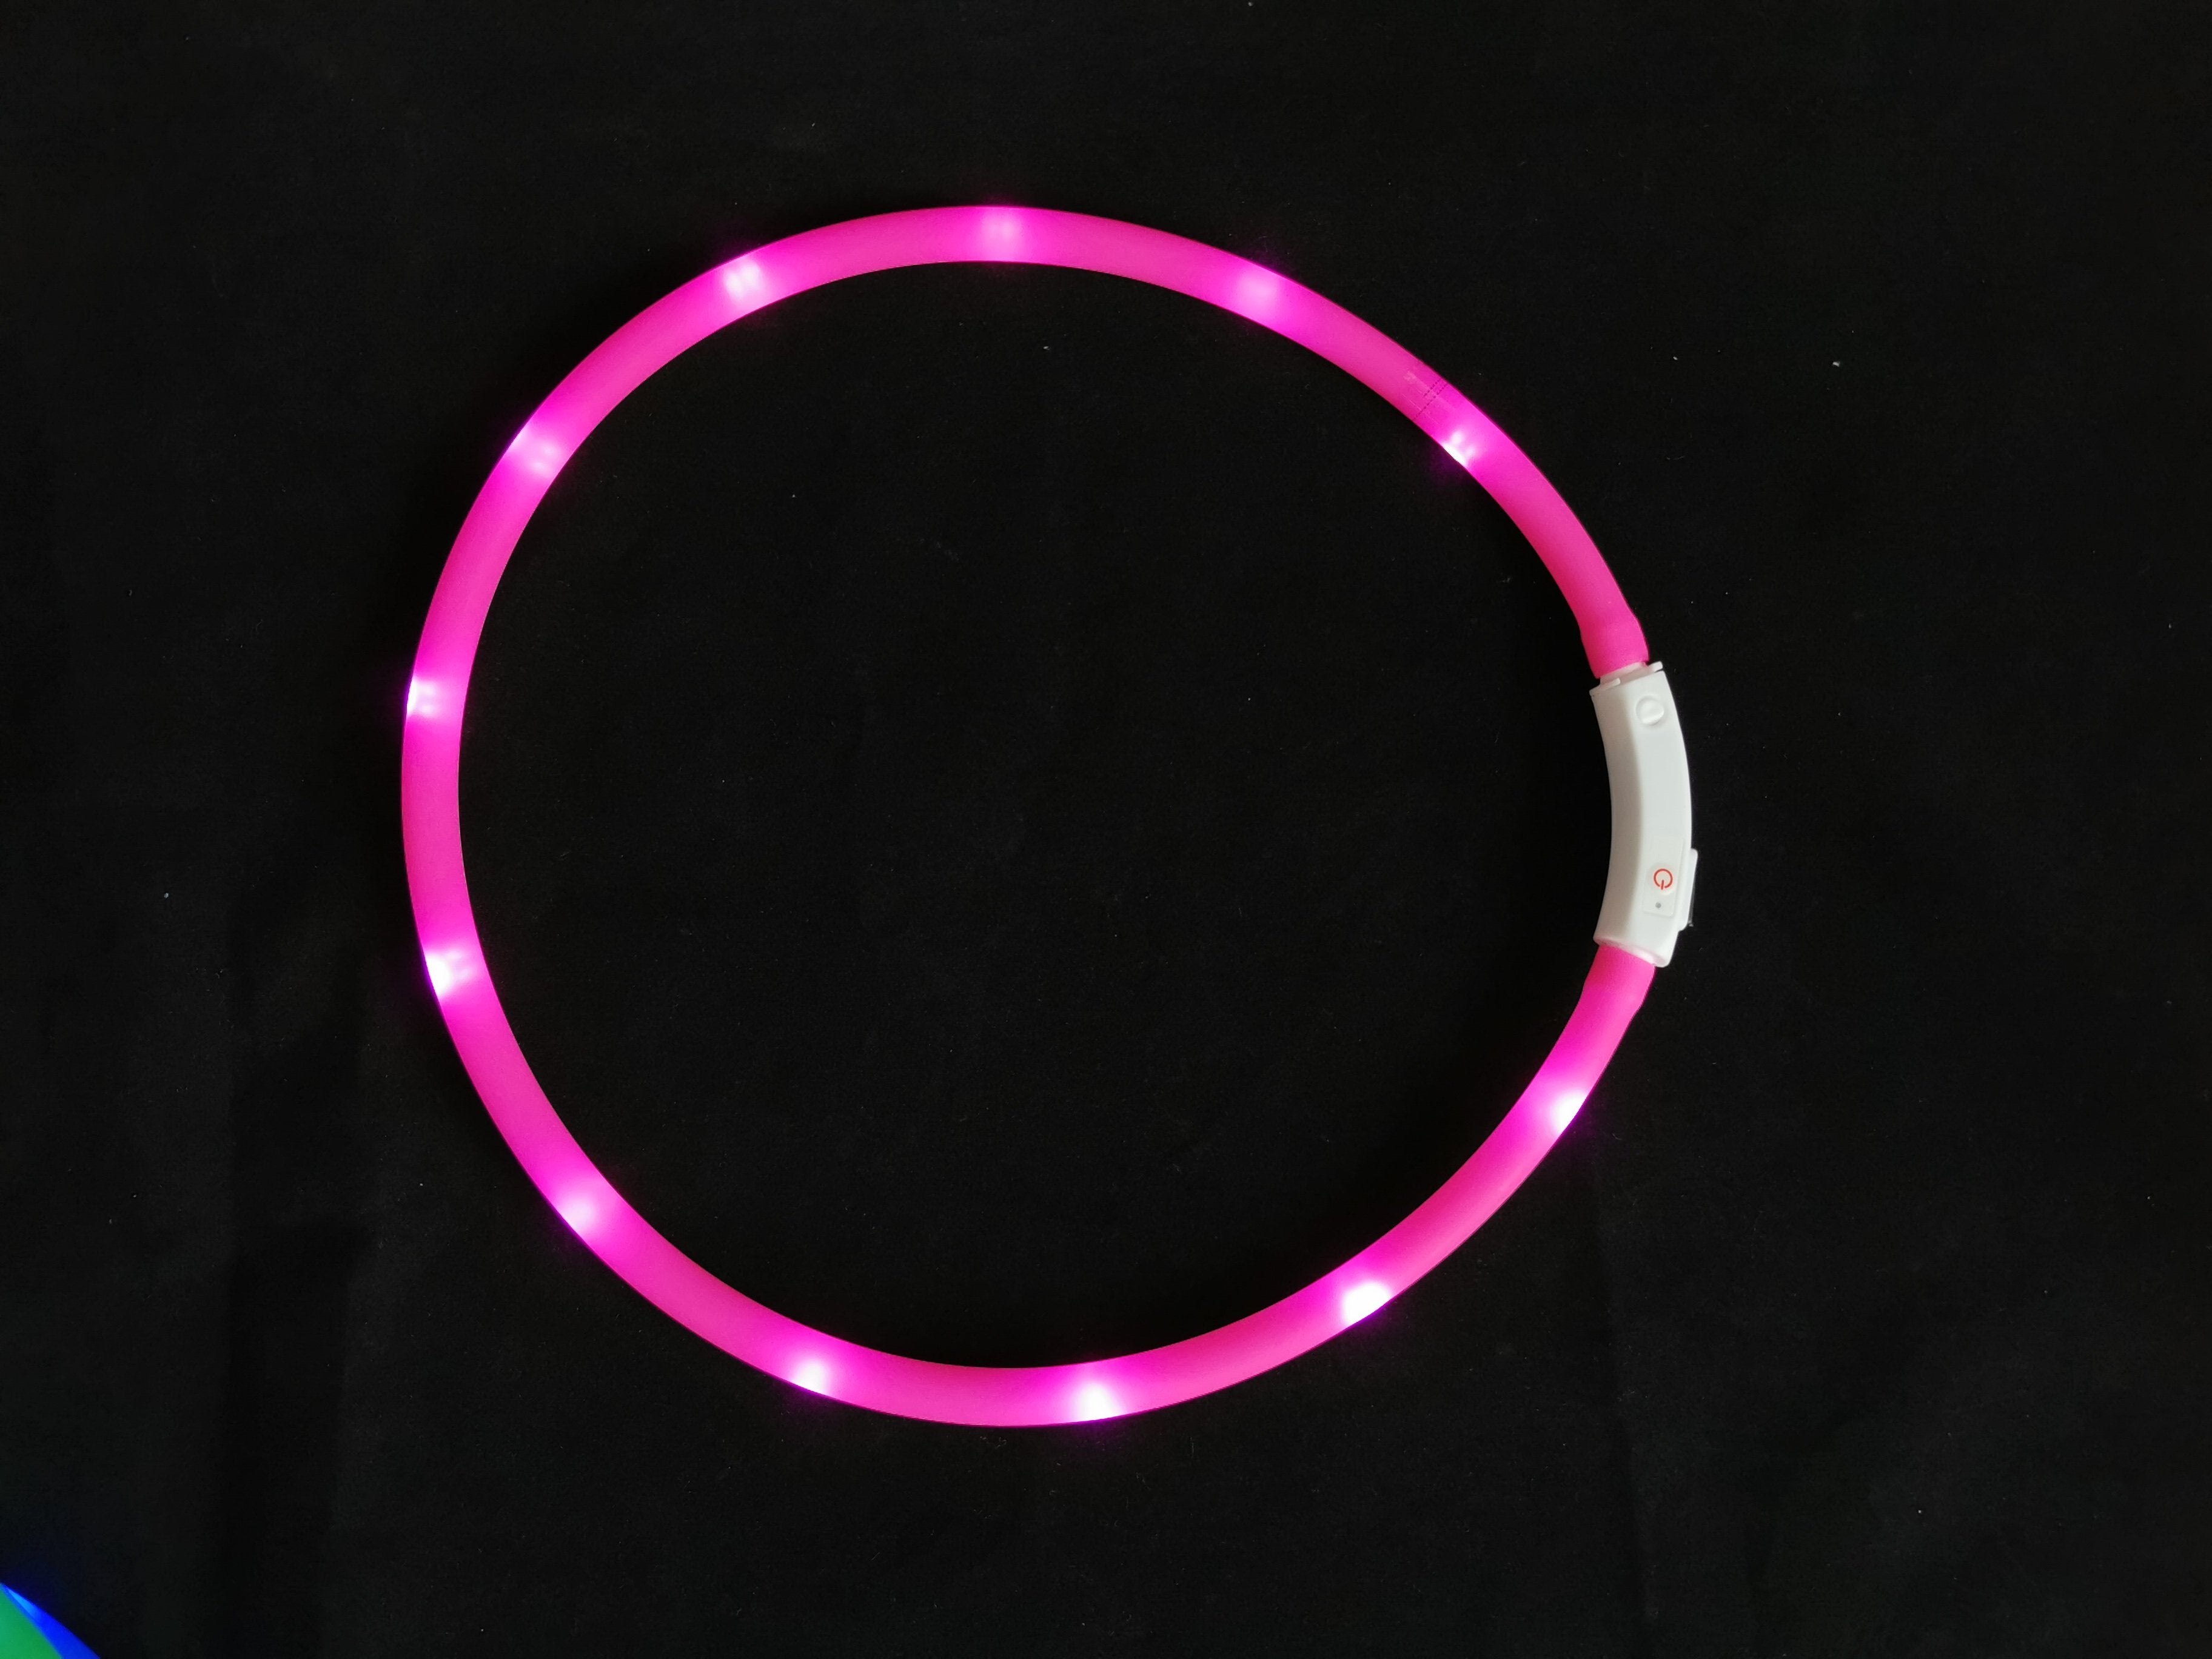 Silicone Cuttable LED Illuminated Dog Collar - USB Rechargeable - Pink